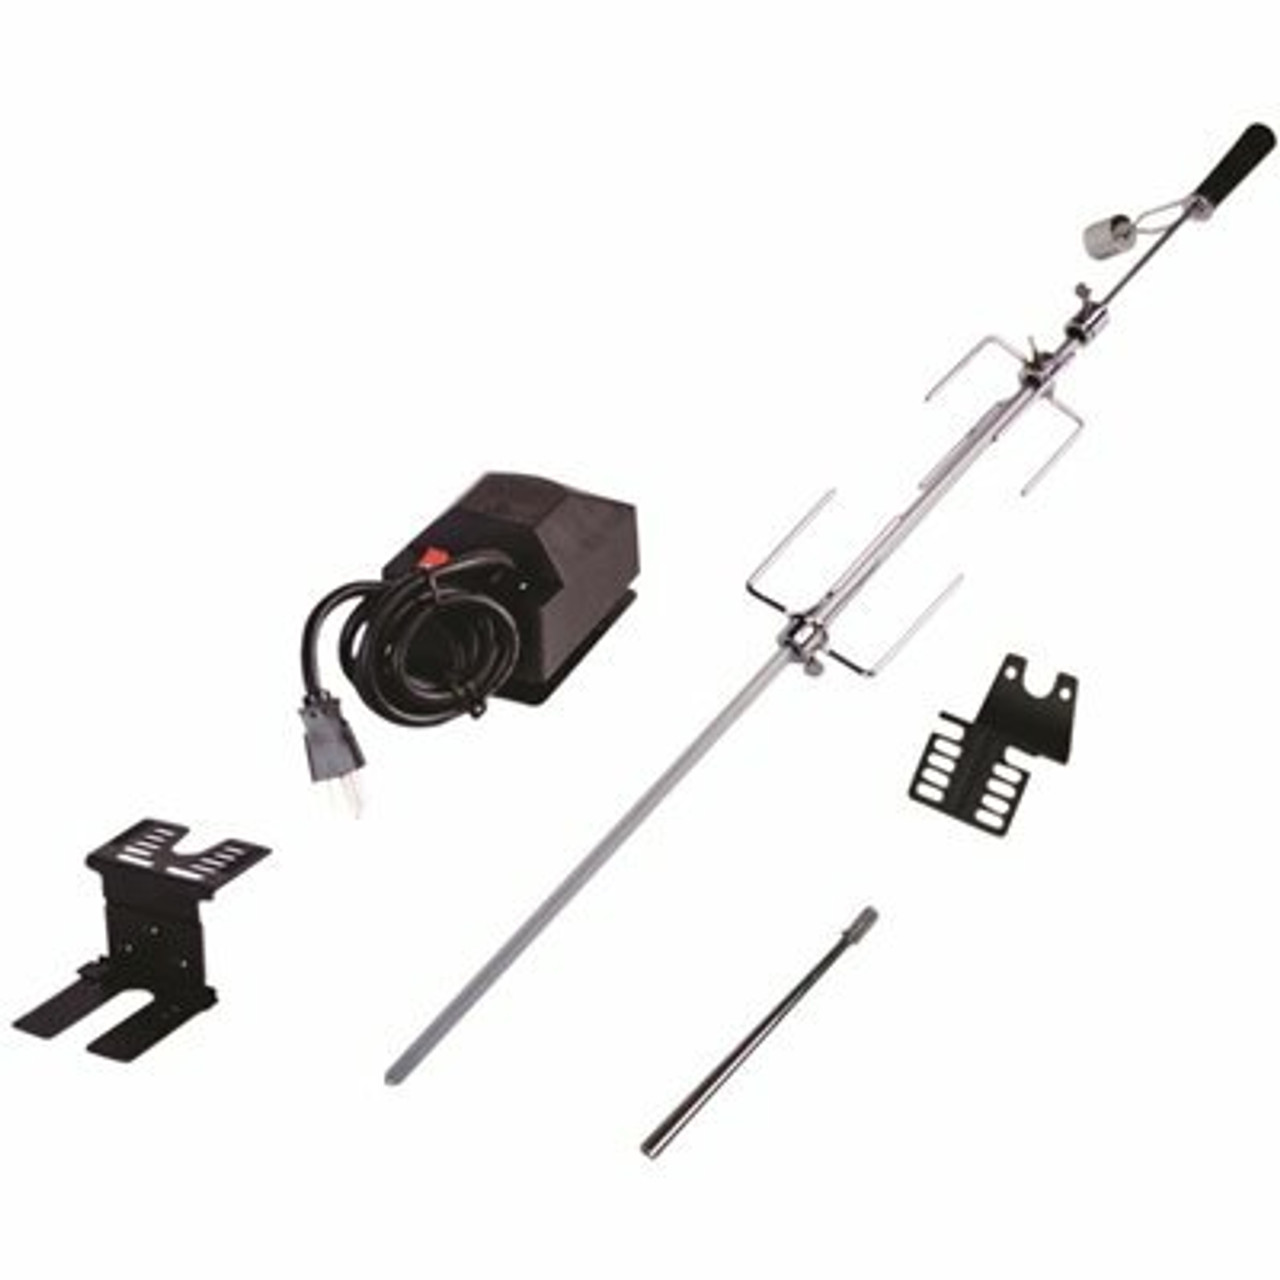 Dyna-Glo Universal Deluxe Rotisserie Kit For Grills